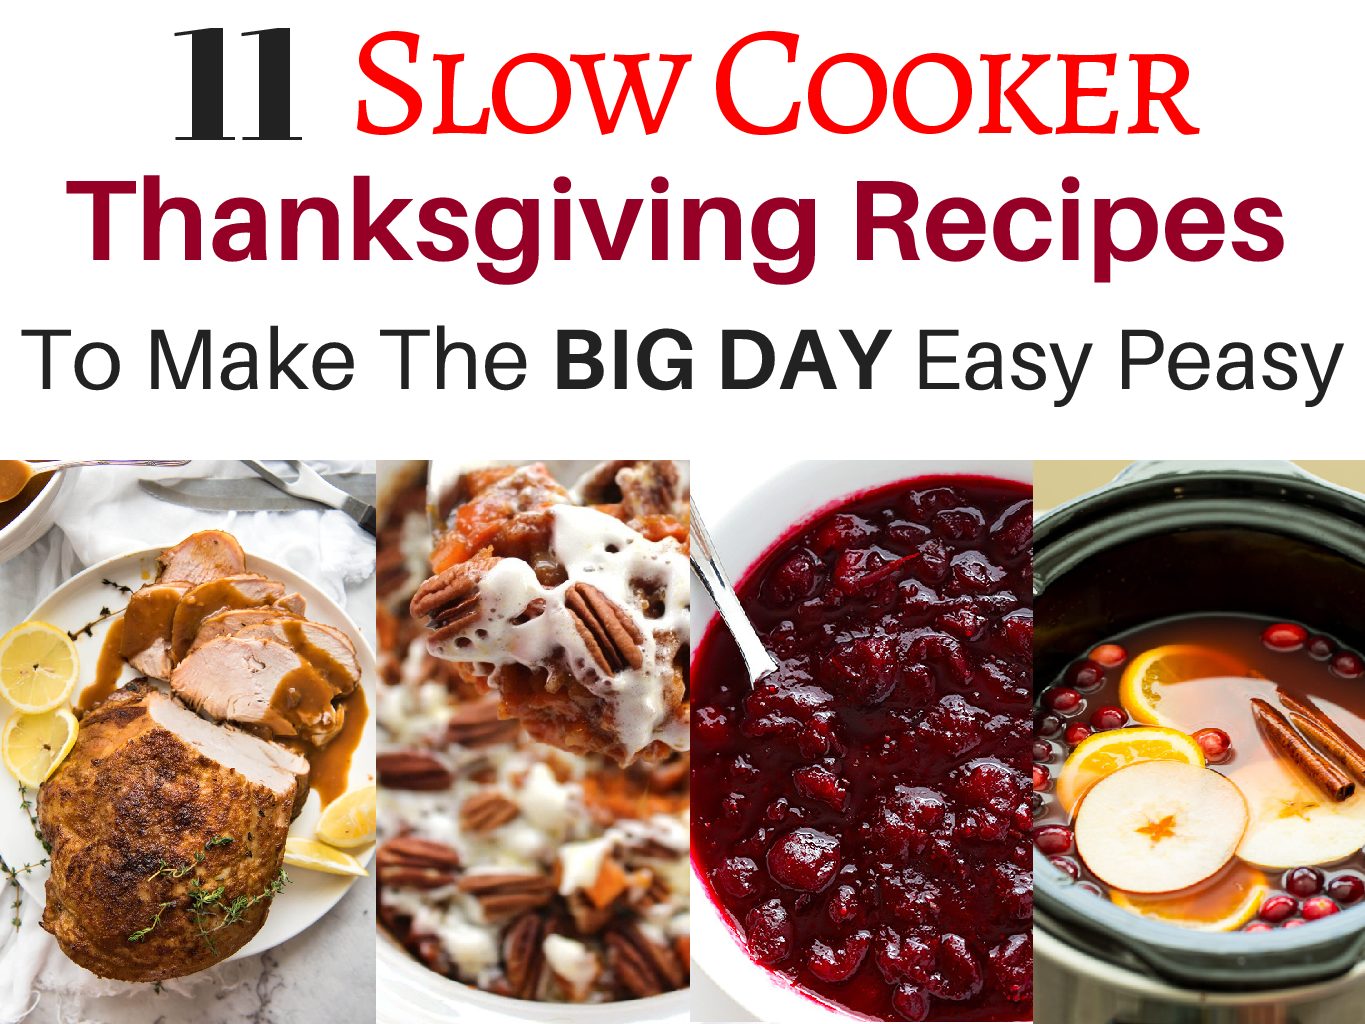 Slow Cooker Thanksgiving Recipes To Make The Big Day Easy Peasy